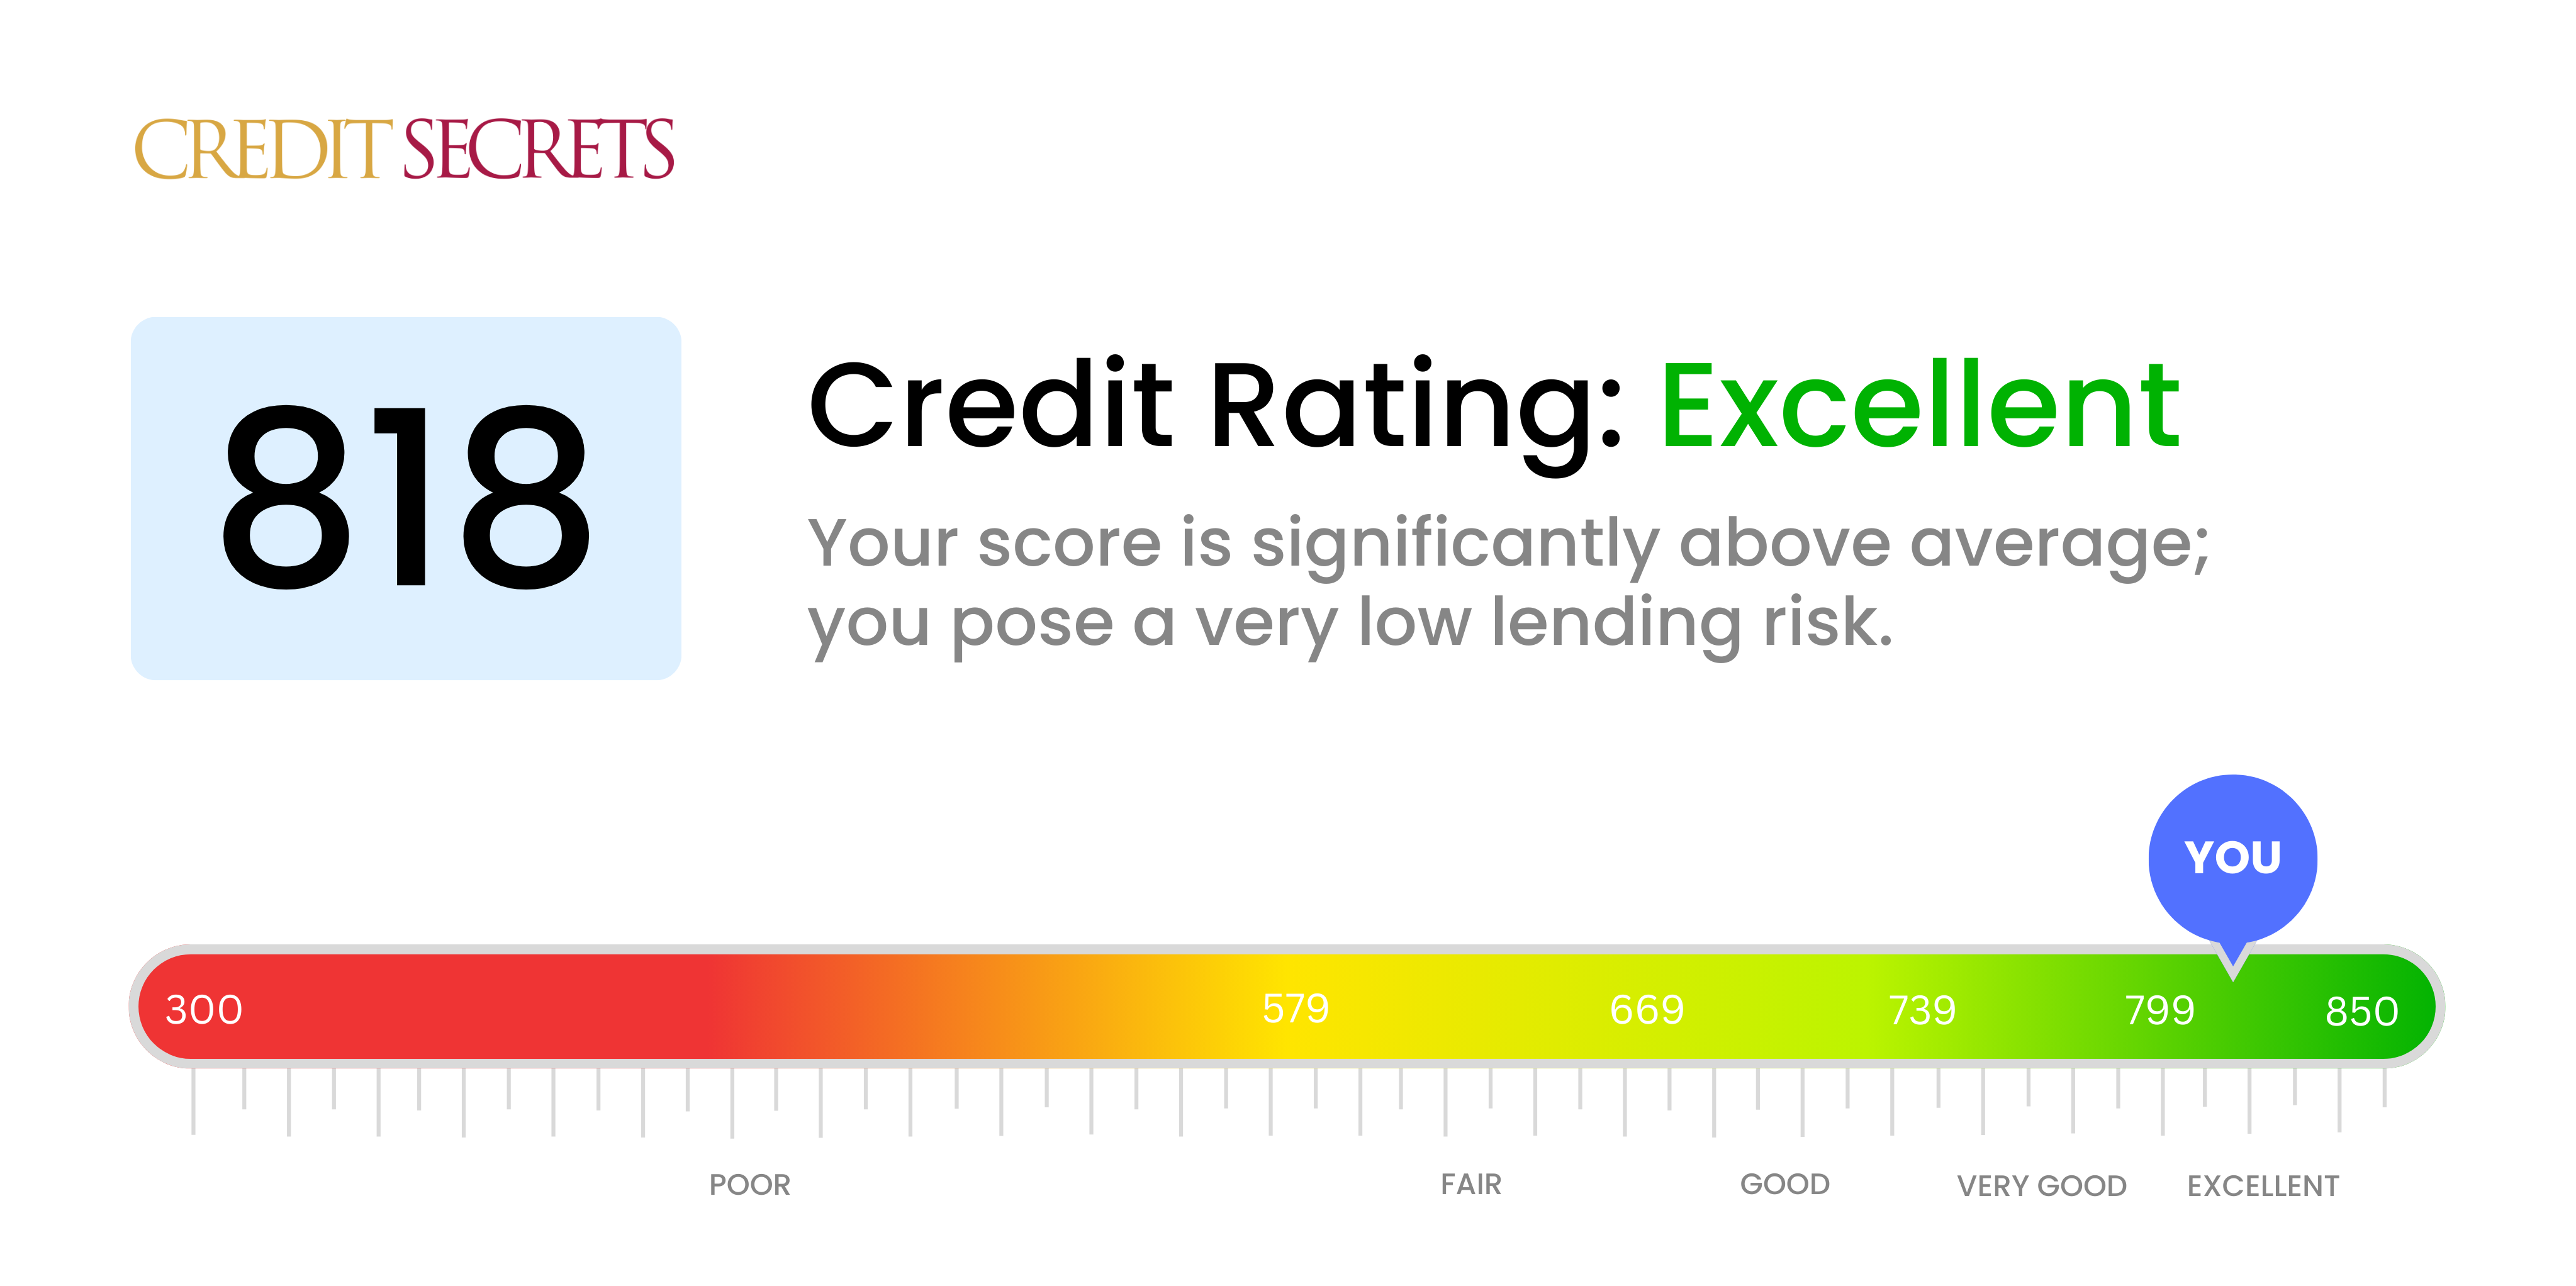 Is 818 a good credit score?